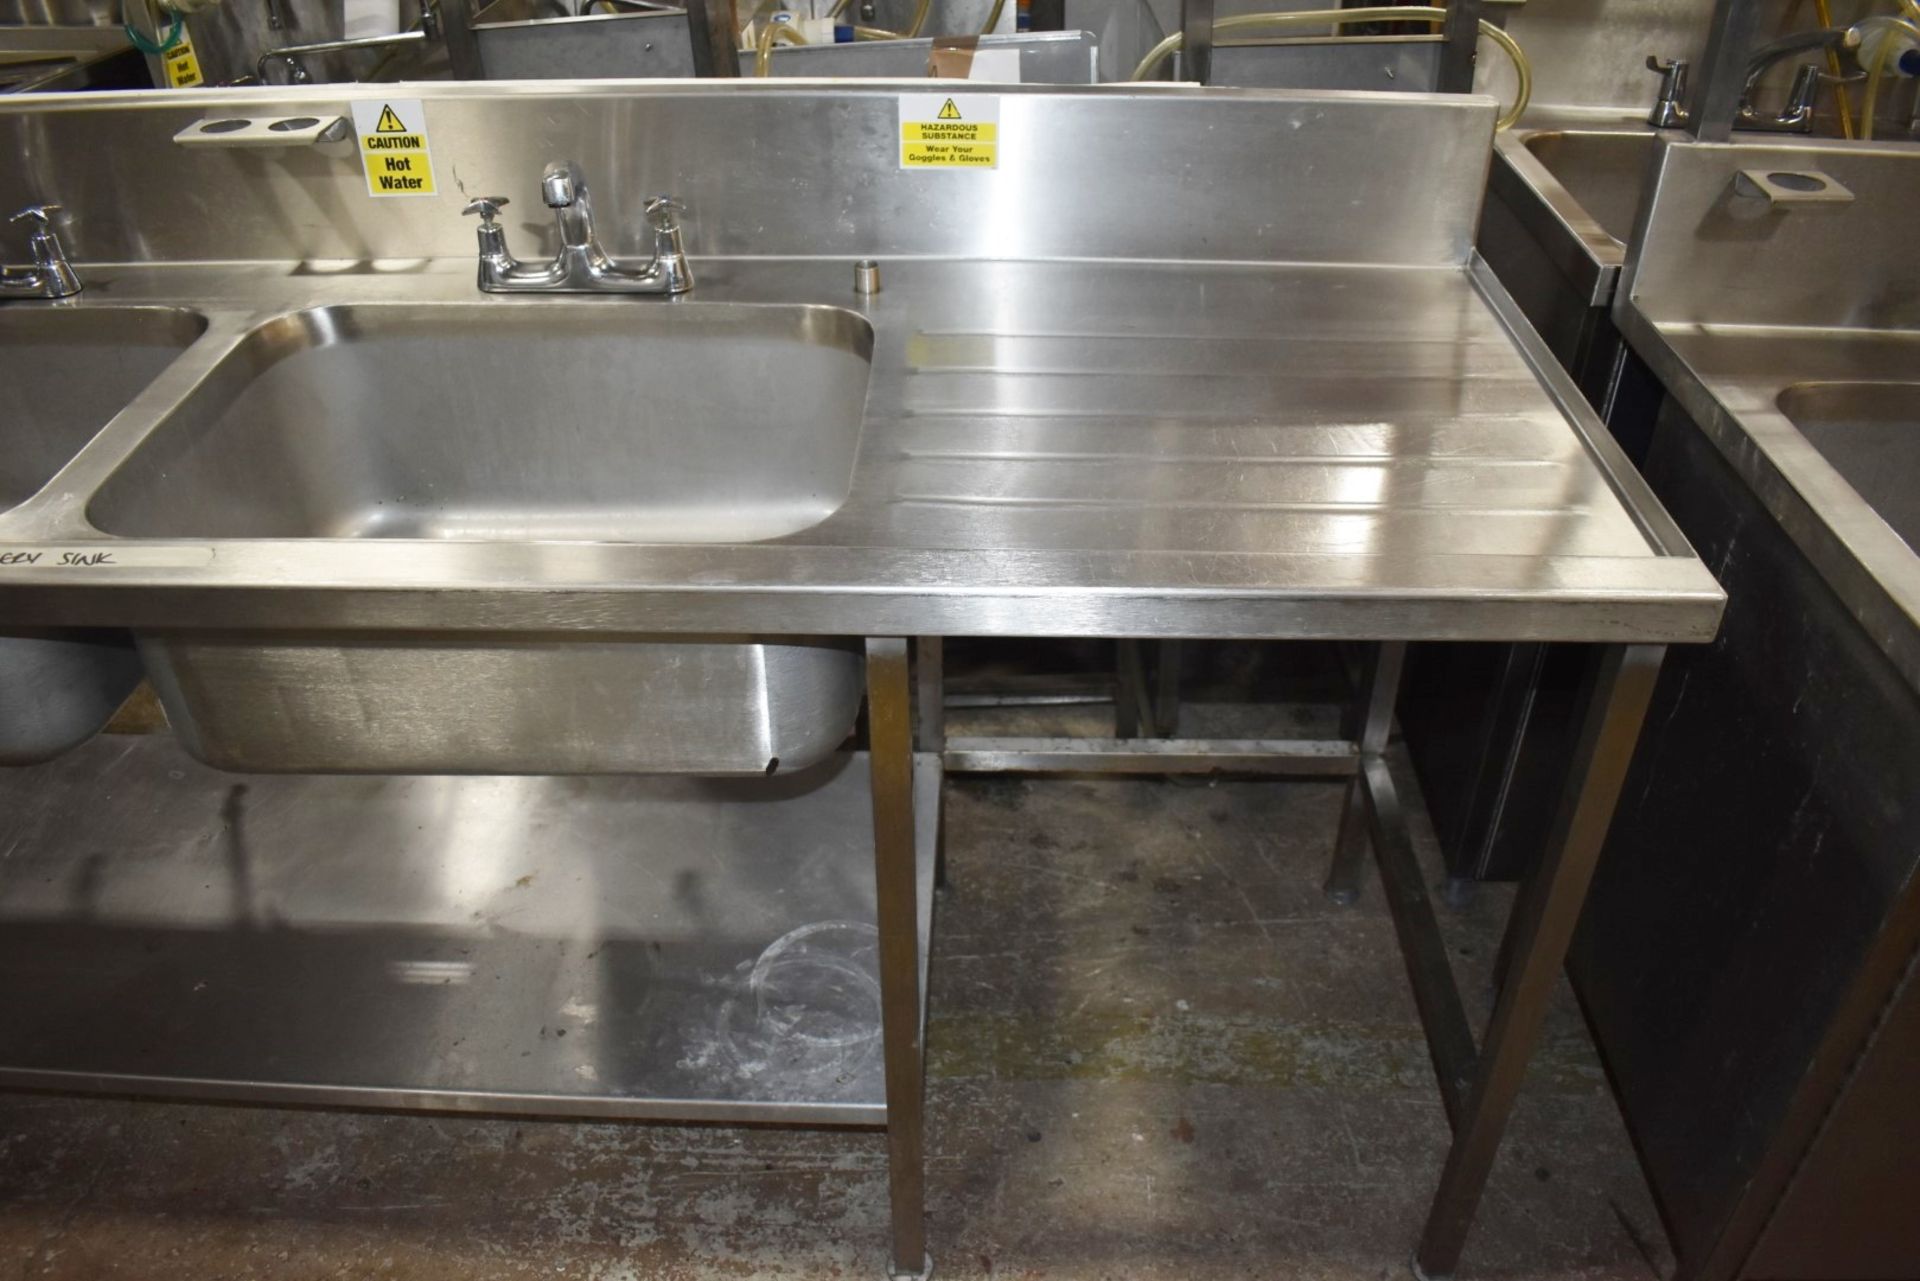 1 x Commercial Kitchen Wash Station With Two Large Sink Bowls, Mixer Taps, Drainer, Handfree Wash - Image 2 of 8